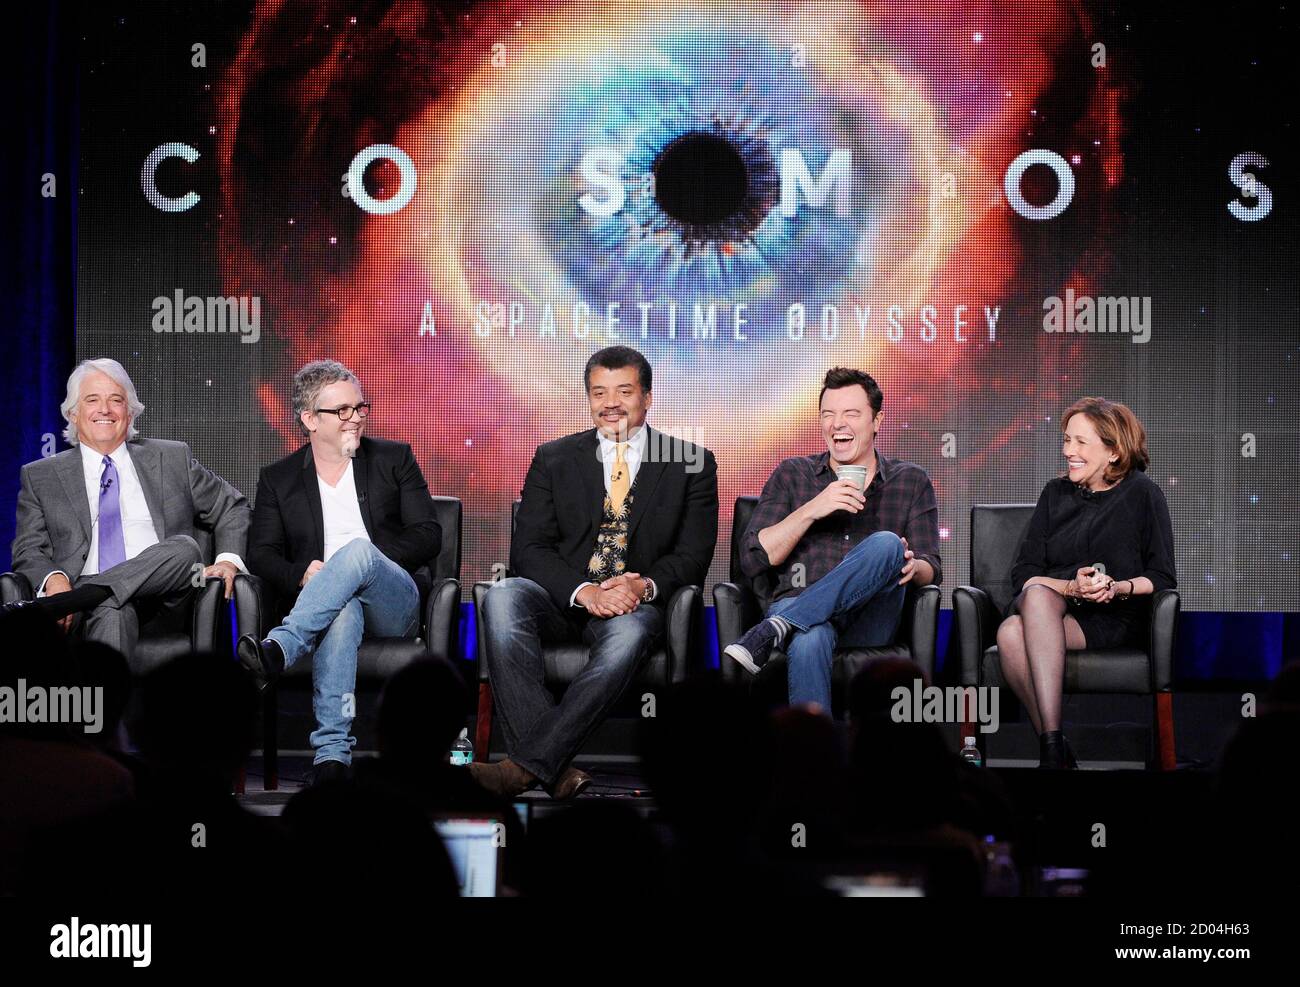 Executive producer Mitchell Cannold (L-R), executive producer and director Brannon Braga, host Neil DeGrasse Tyson, executive producer Seth MacFarlane, executive producer and writer Ann Druyan of the new show 'Cosmos' participate in Fox Broadcasting Company's part of the Television Critics Association (TCA) Winter 2014 presentations in Pasadena, California, January 13 , 2014. REUTERS/Kevork Djansezian  (UNITED STATES - Tags: ENTERTAINMENT) Stock Photo